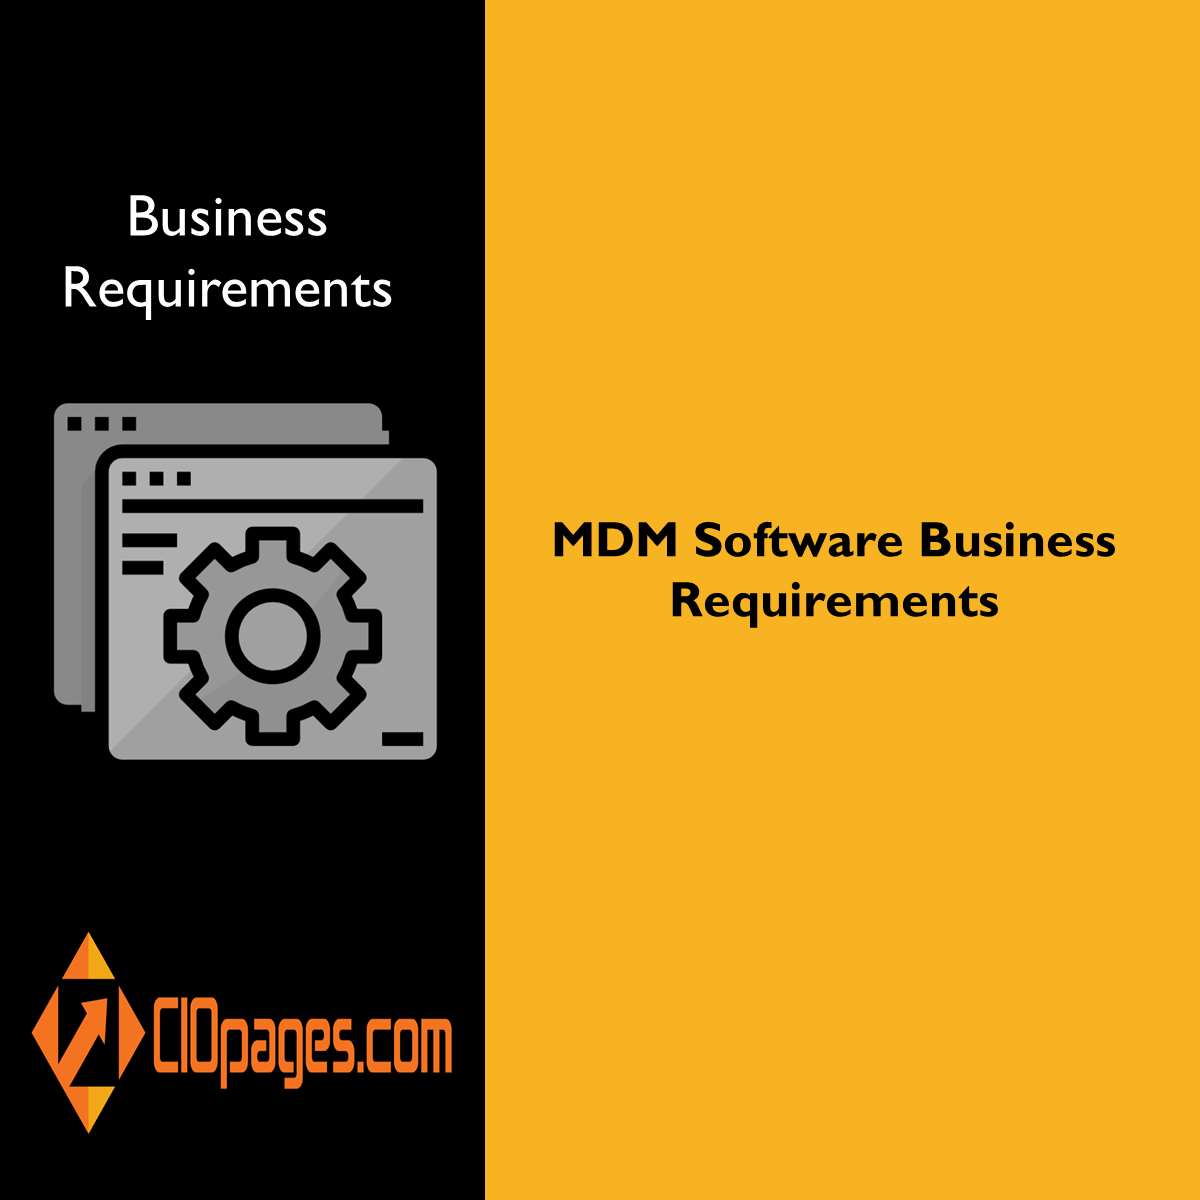 MDM Software Business Requirements